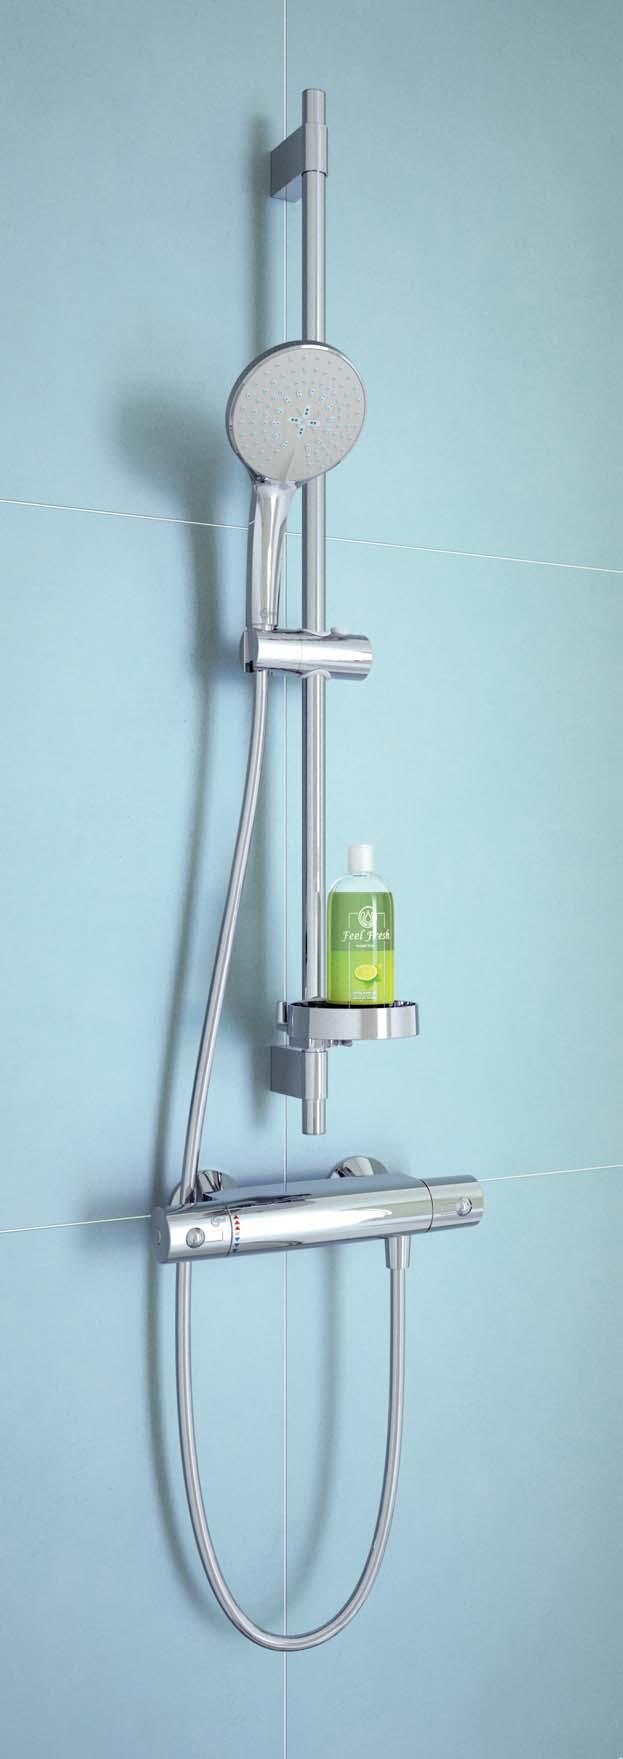 PRODUCT OPTIONS SHOWER KITS SLIM, SMART, REFRESHING Trust Ideal Standard to offer a wide range of fixed head and flexible hose shower kits in